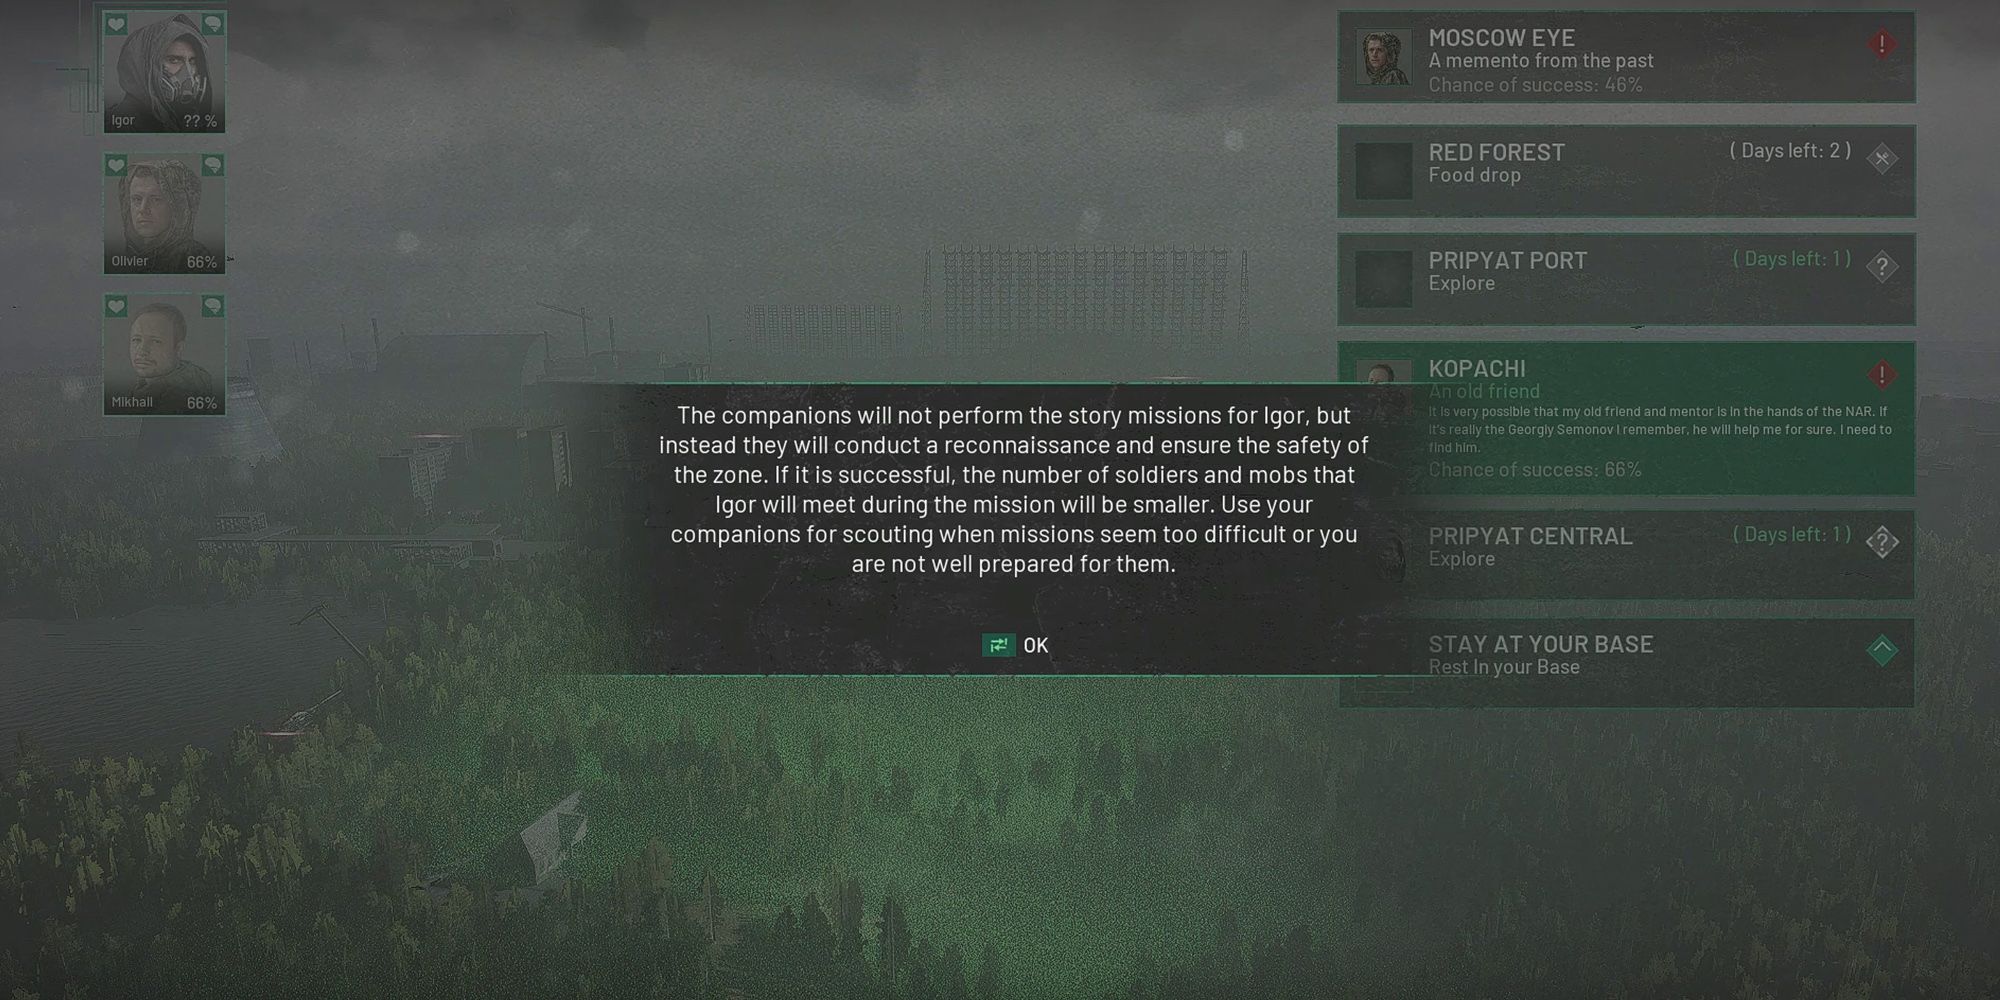 Chernobylite---Warning-Pop-Up-When-Attempting-To-Send-Ally-On-Story-Mission-1